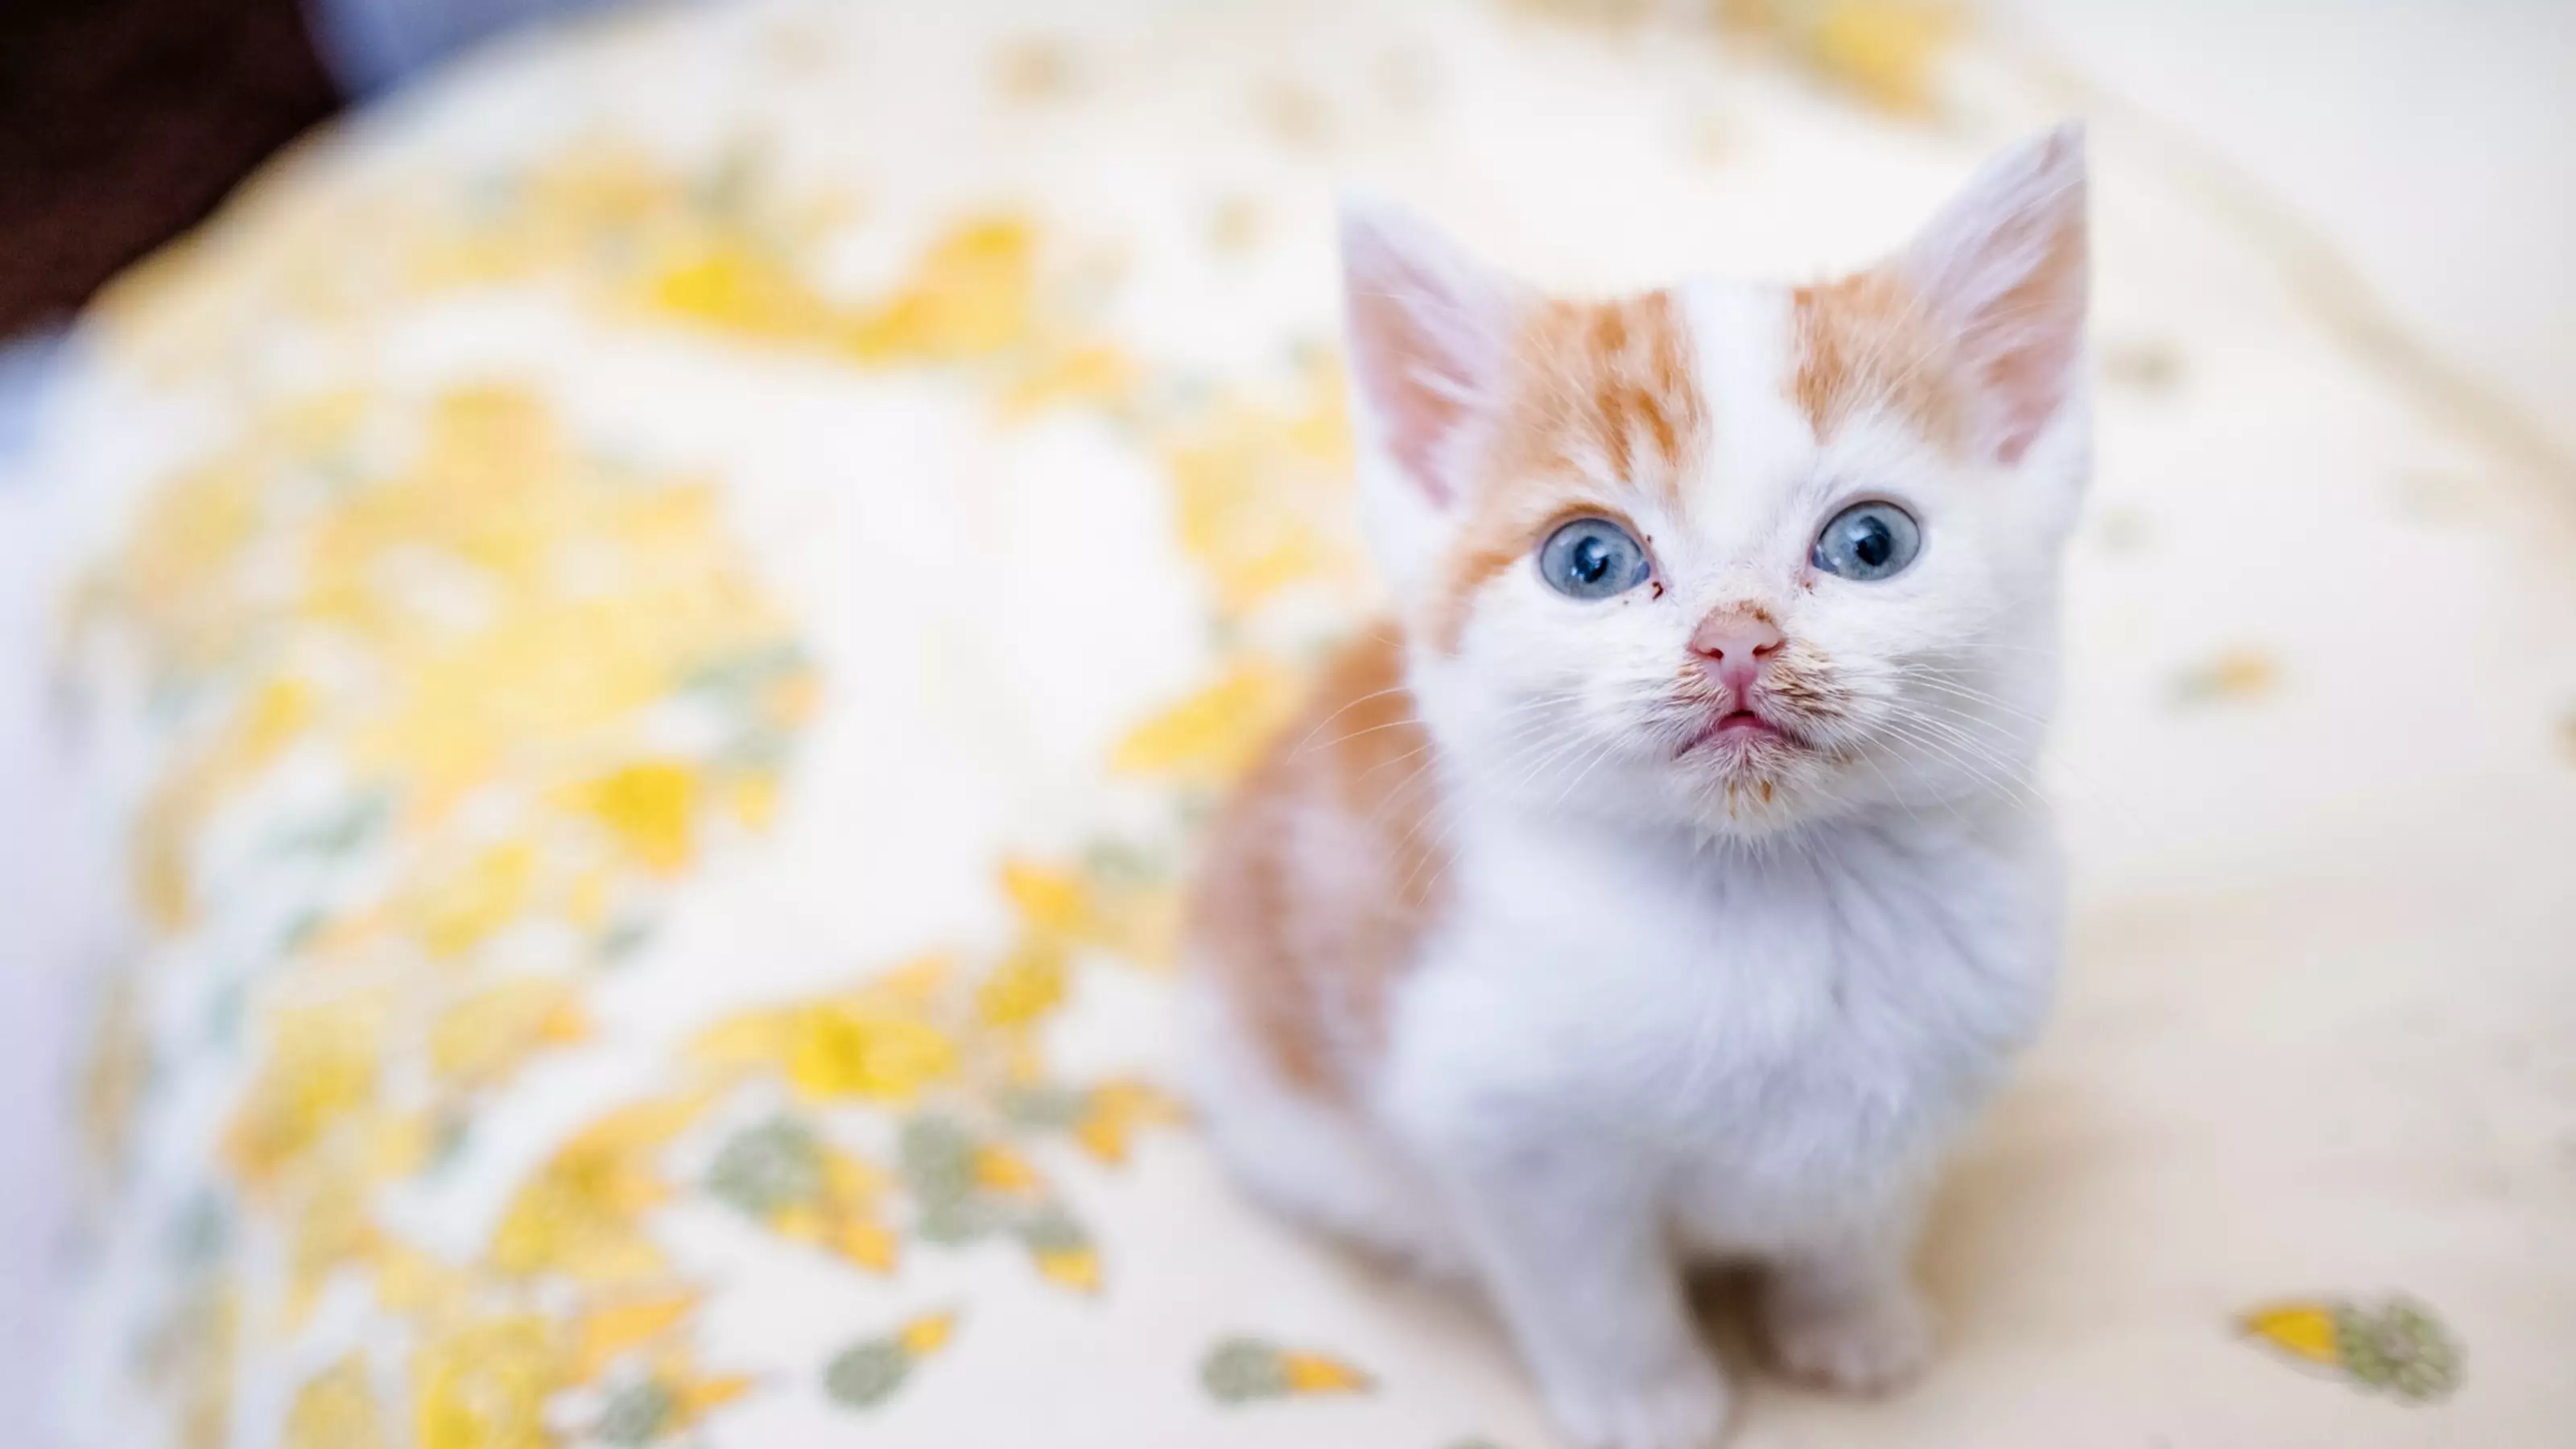 Tiny ginger and white kitten Joe looking up at camera while sitting on a floral cushion